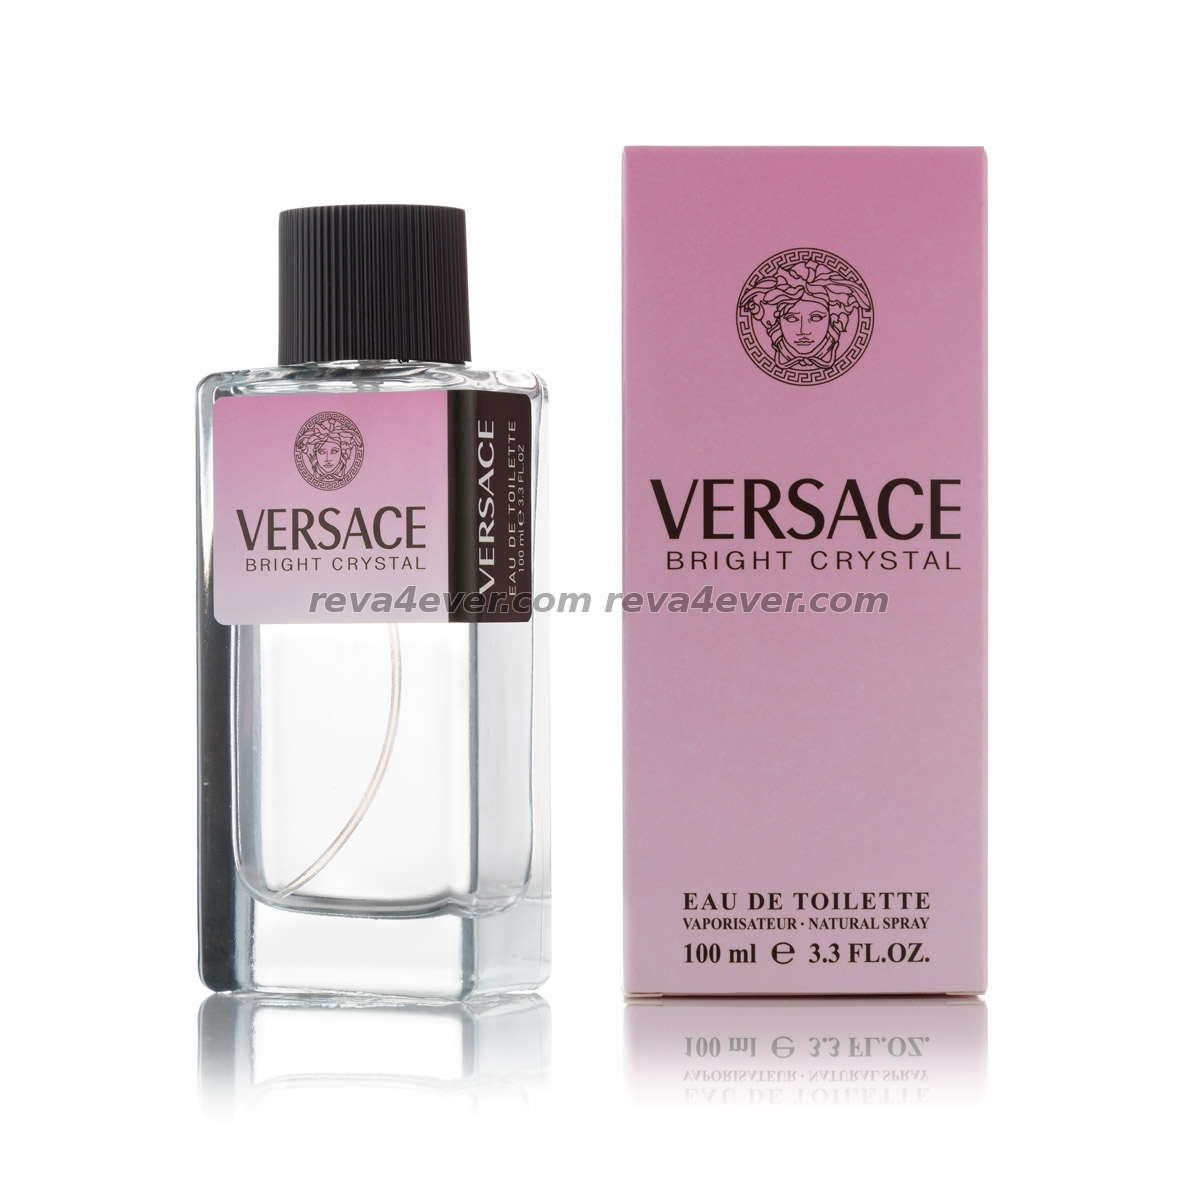 Versace Bright Crystal edt 100ml Imperatrice